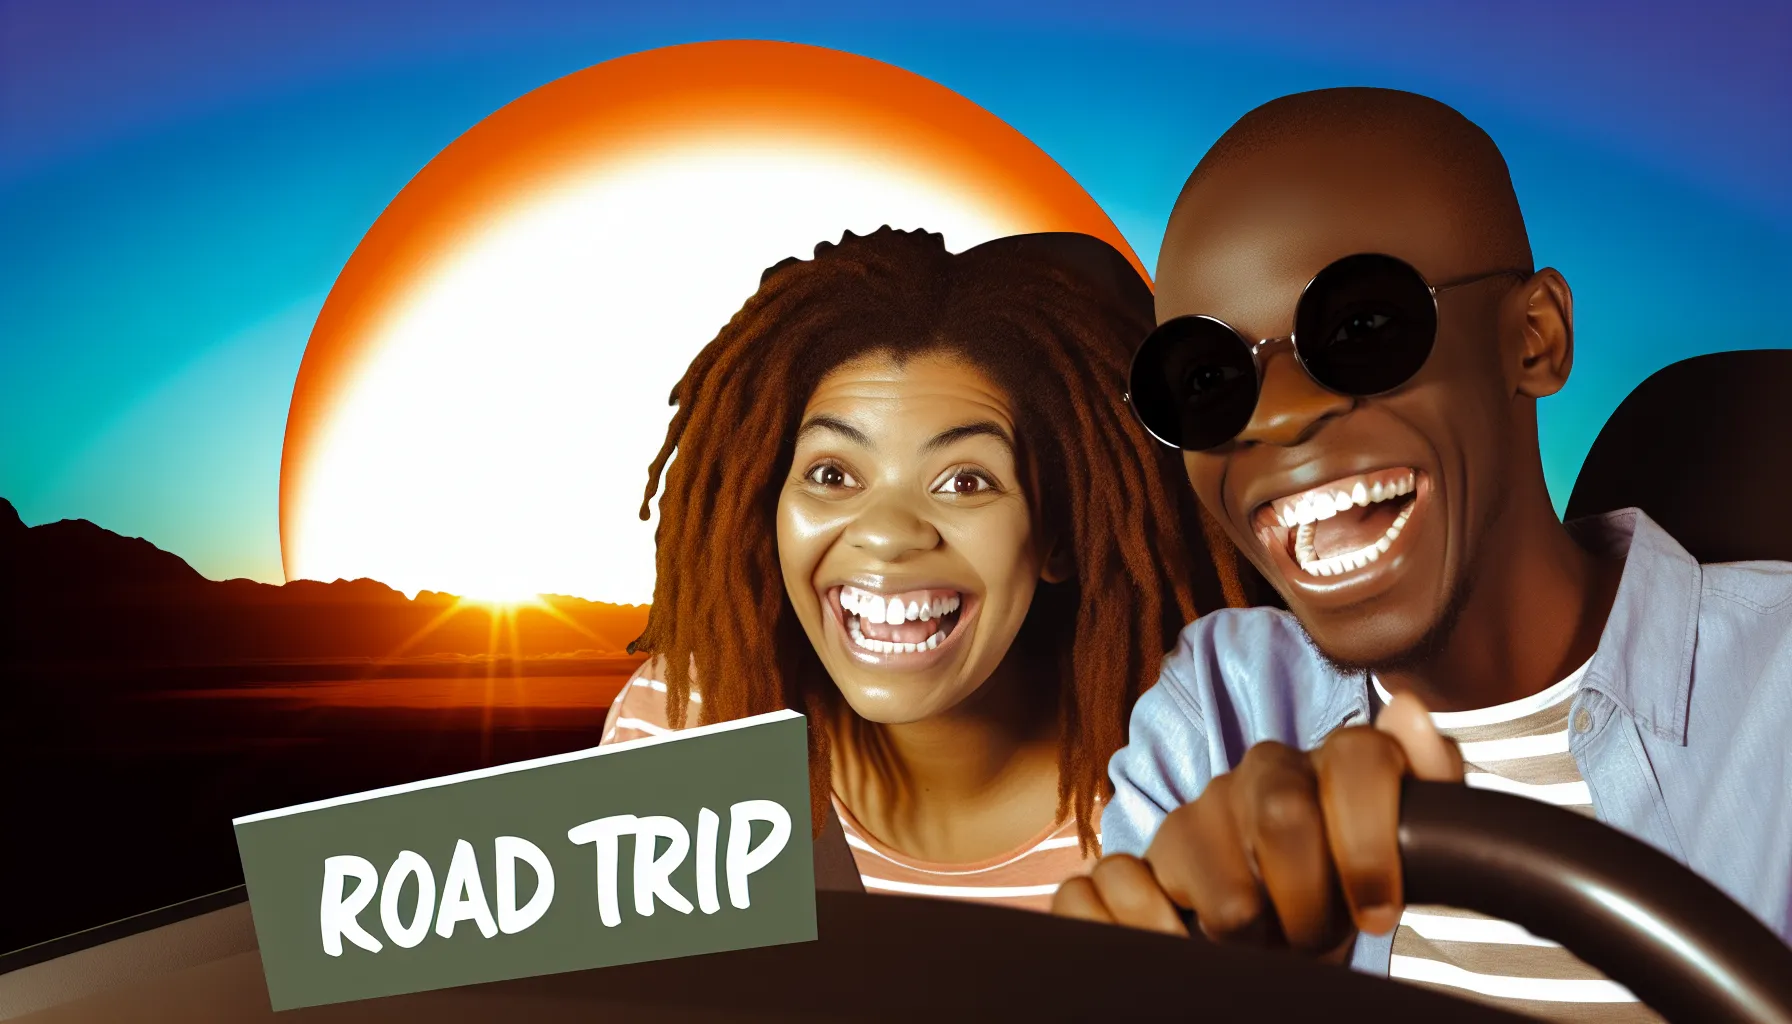 Couple on a road trip, embracing the joy of discovery